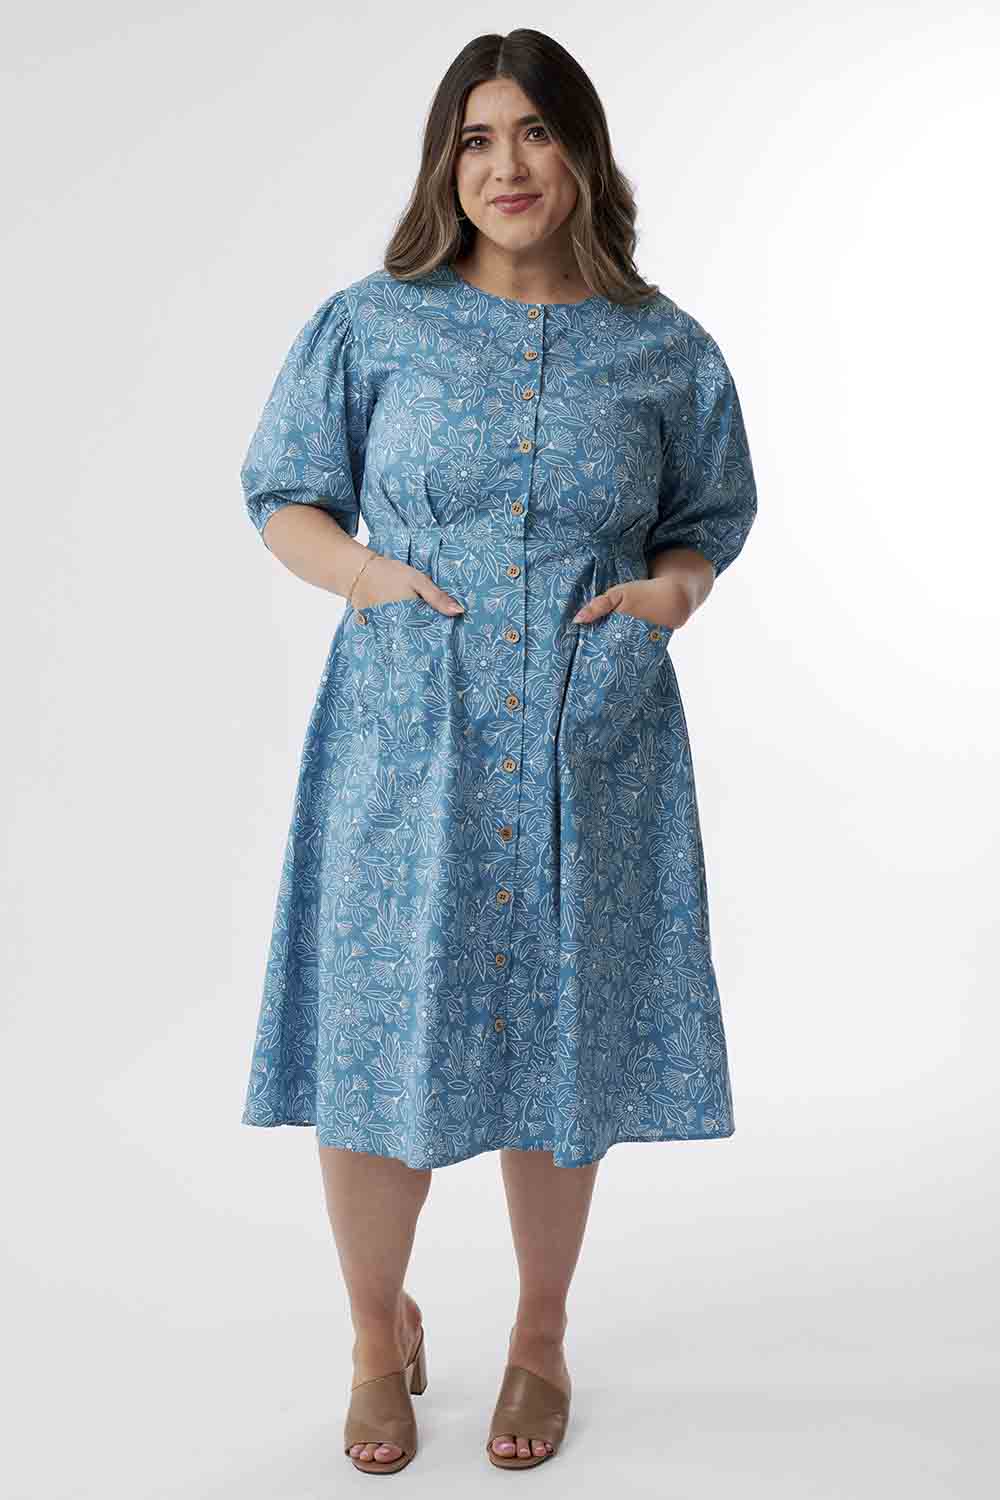 Always Ready Blue Floral Buttoned Midi Dress